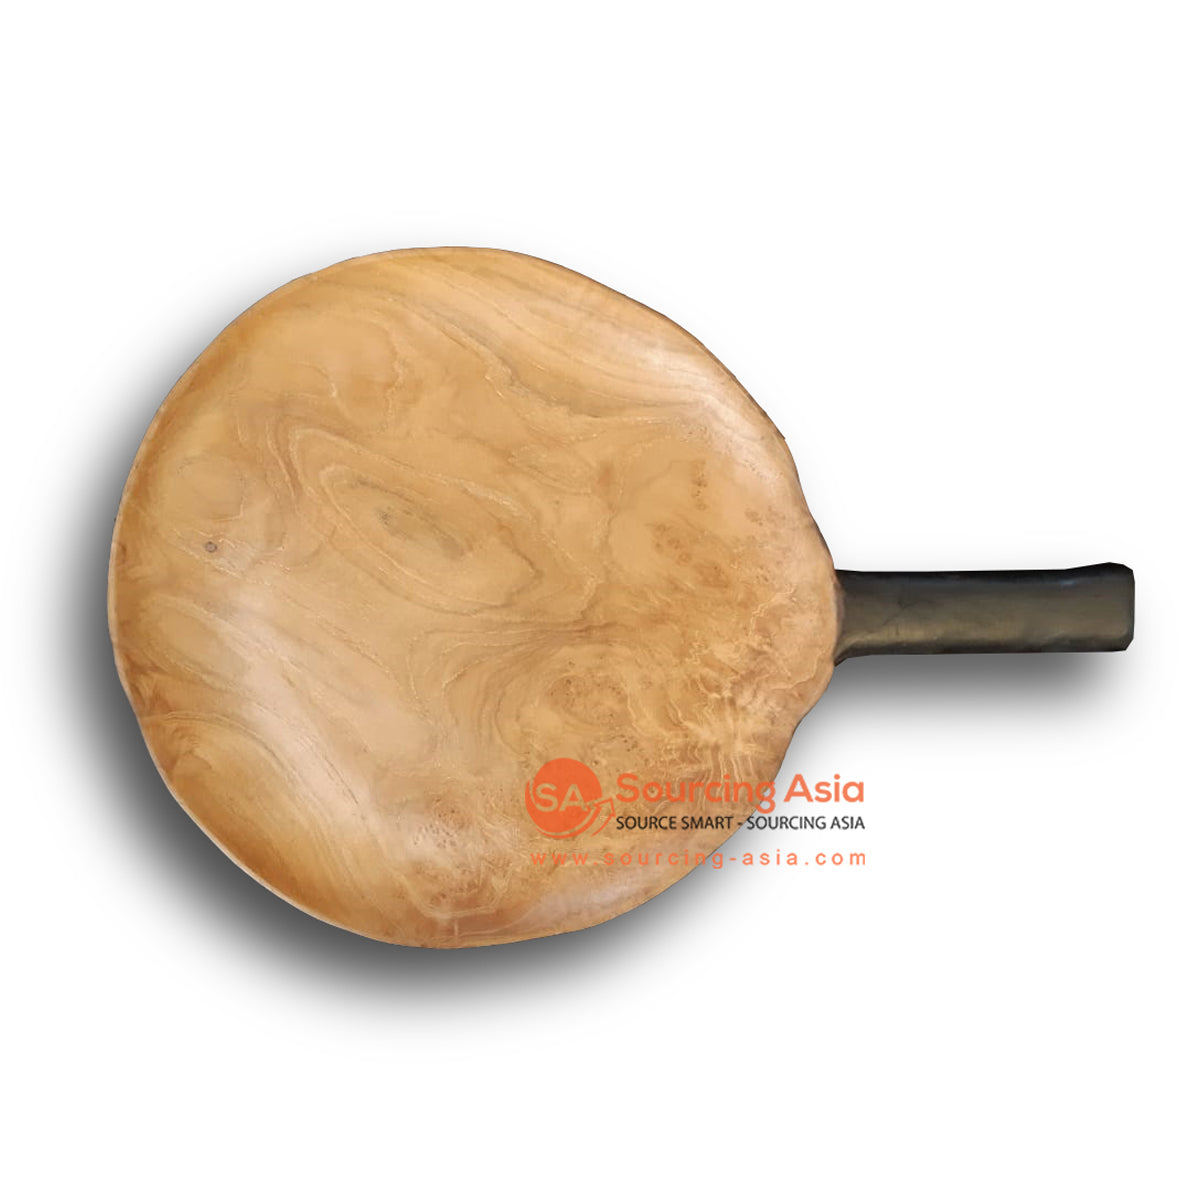 BMW043-5 NATURAL PLATE WITH BLACK HANDLE